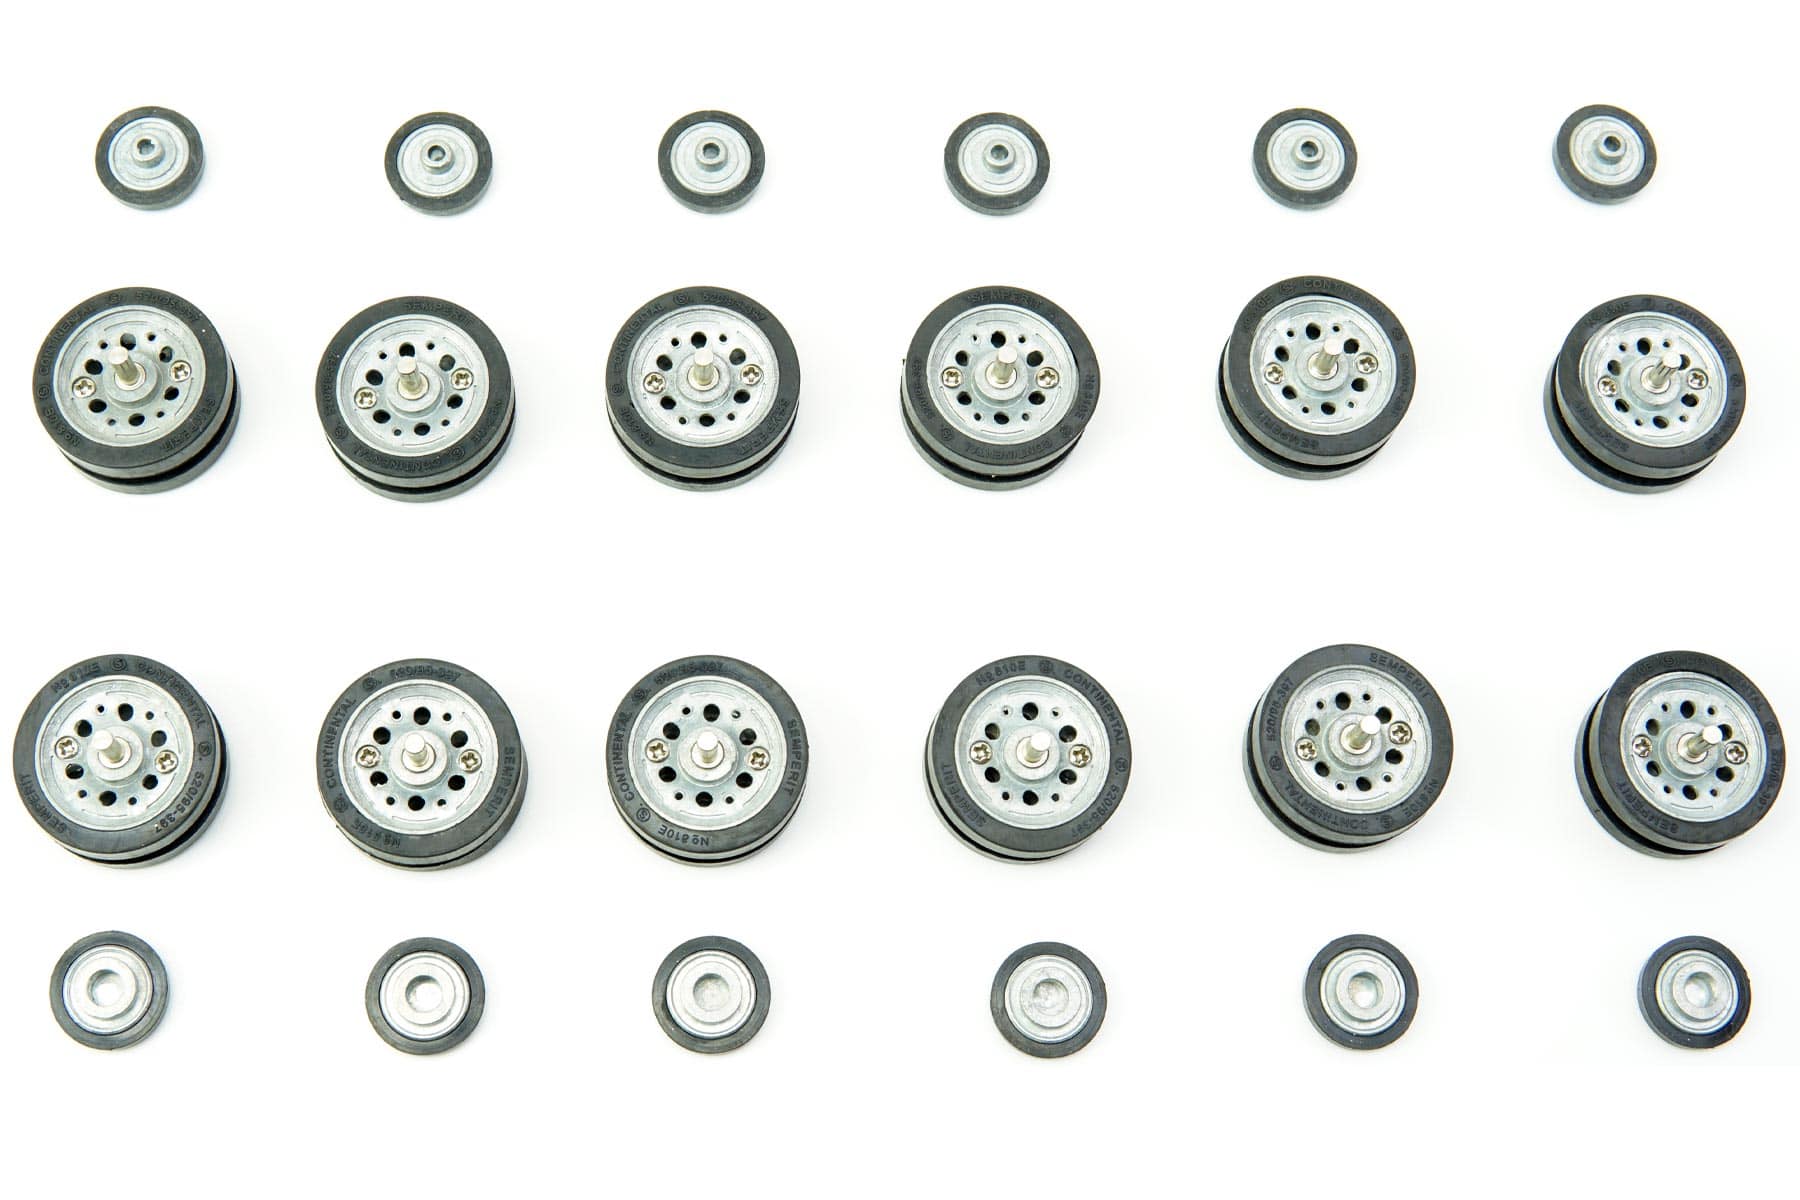 Torro 1/16 Scale German Panzer III (Ausf. L) Road Wheels with Rubber Tires TOR1383848004